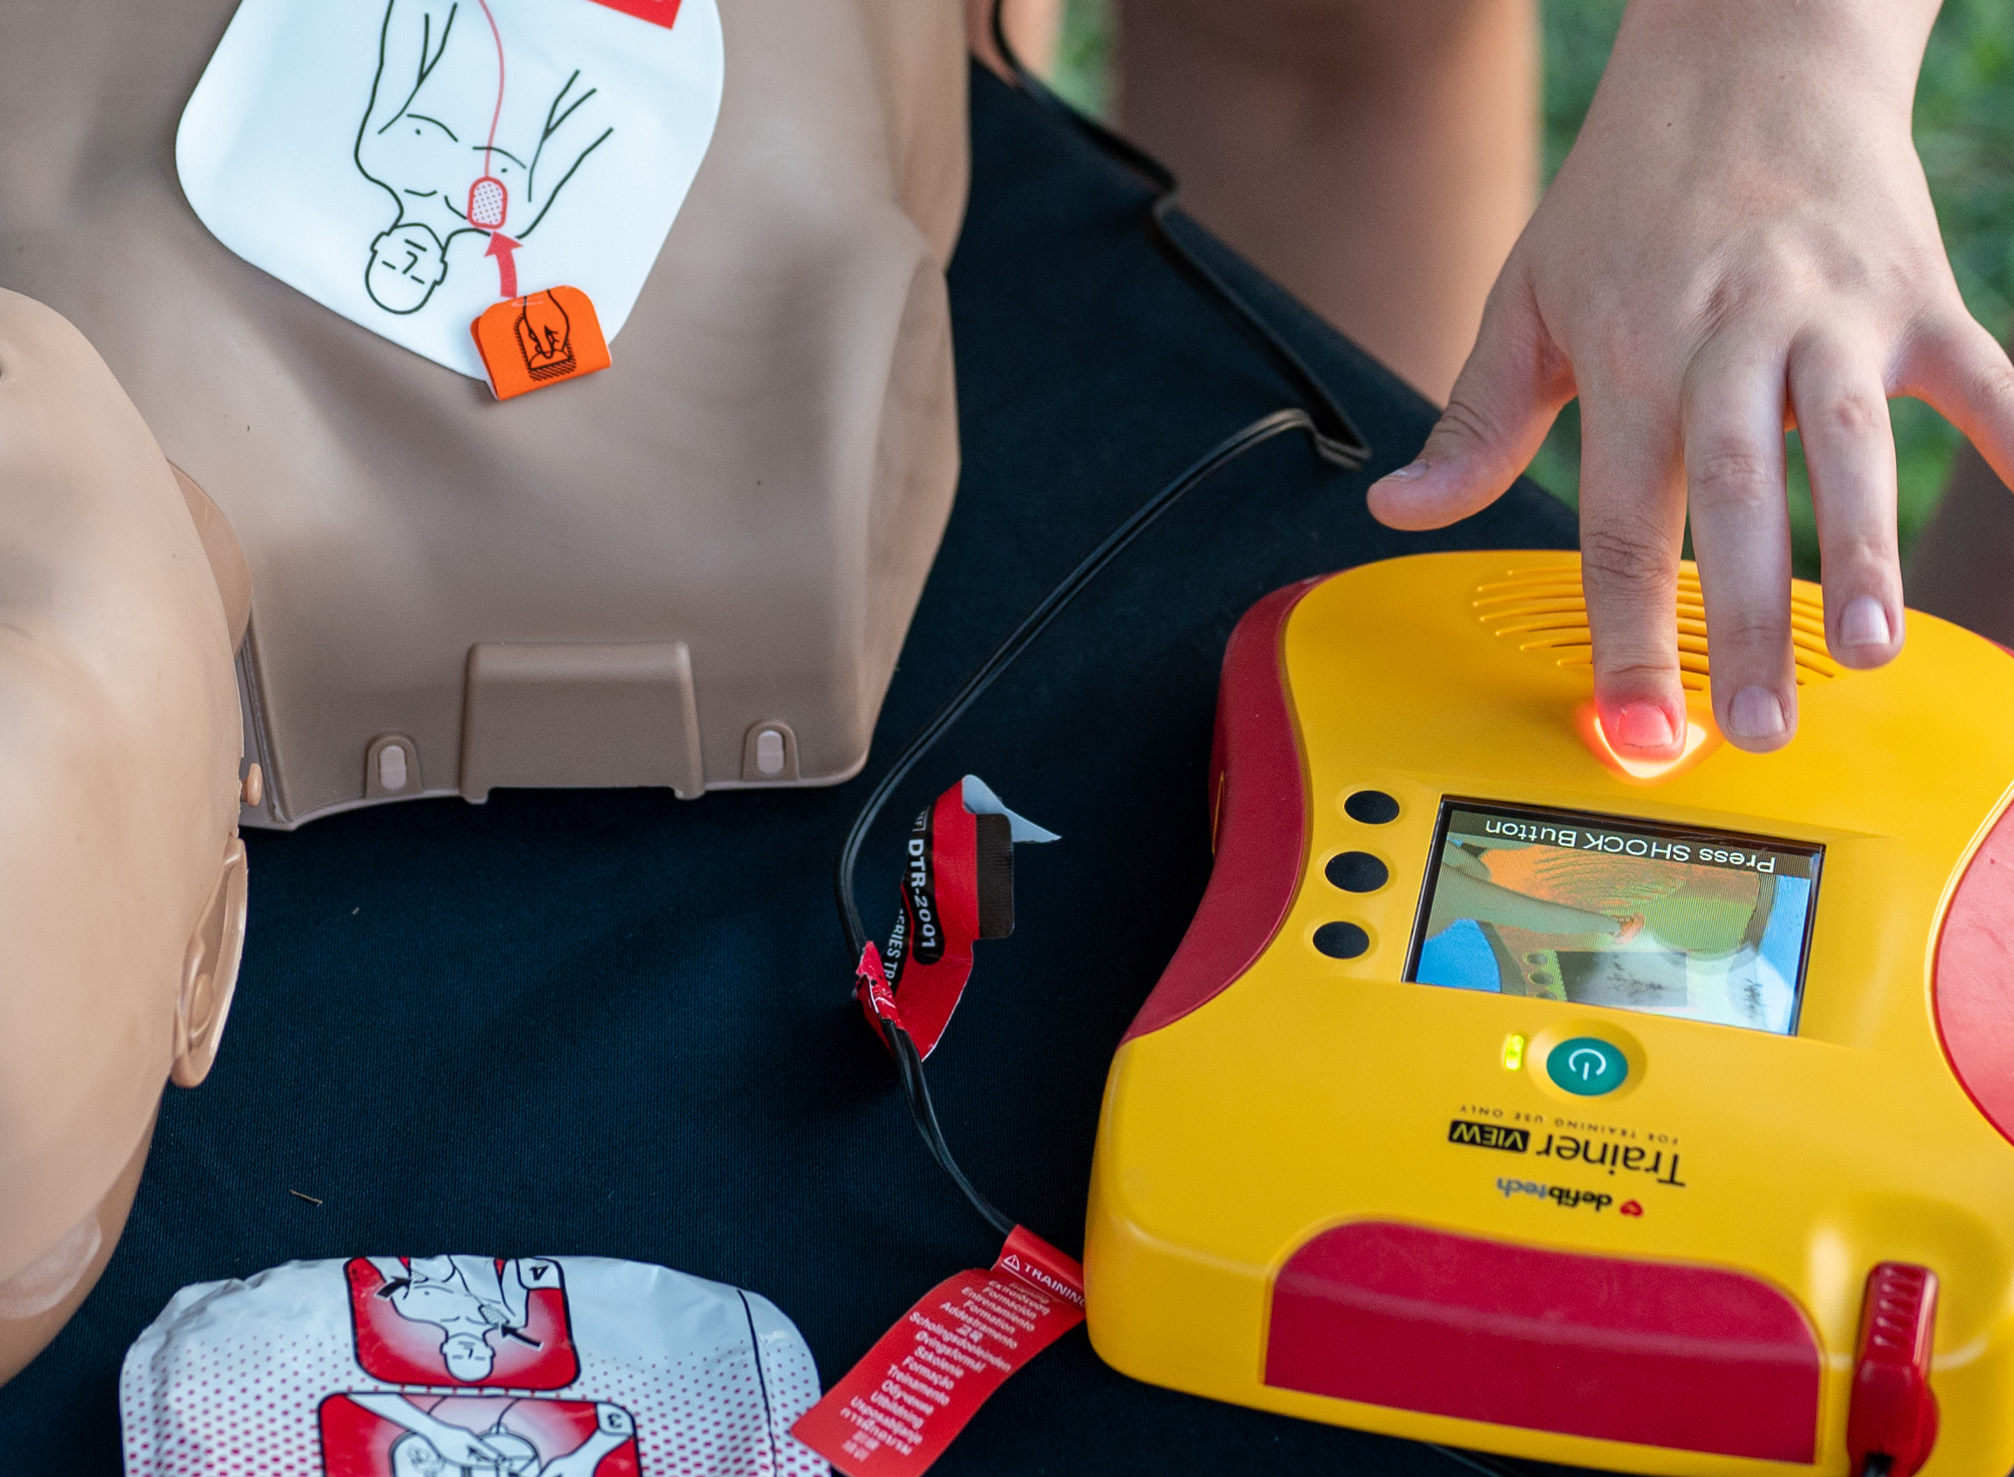 aed-frequently-asked-questions-steps-to-use-an-aed